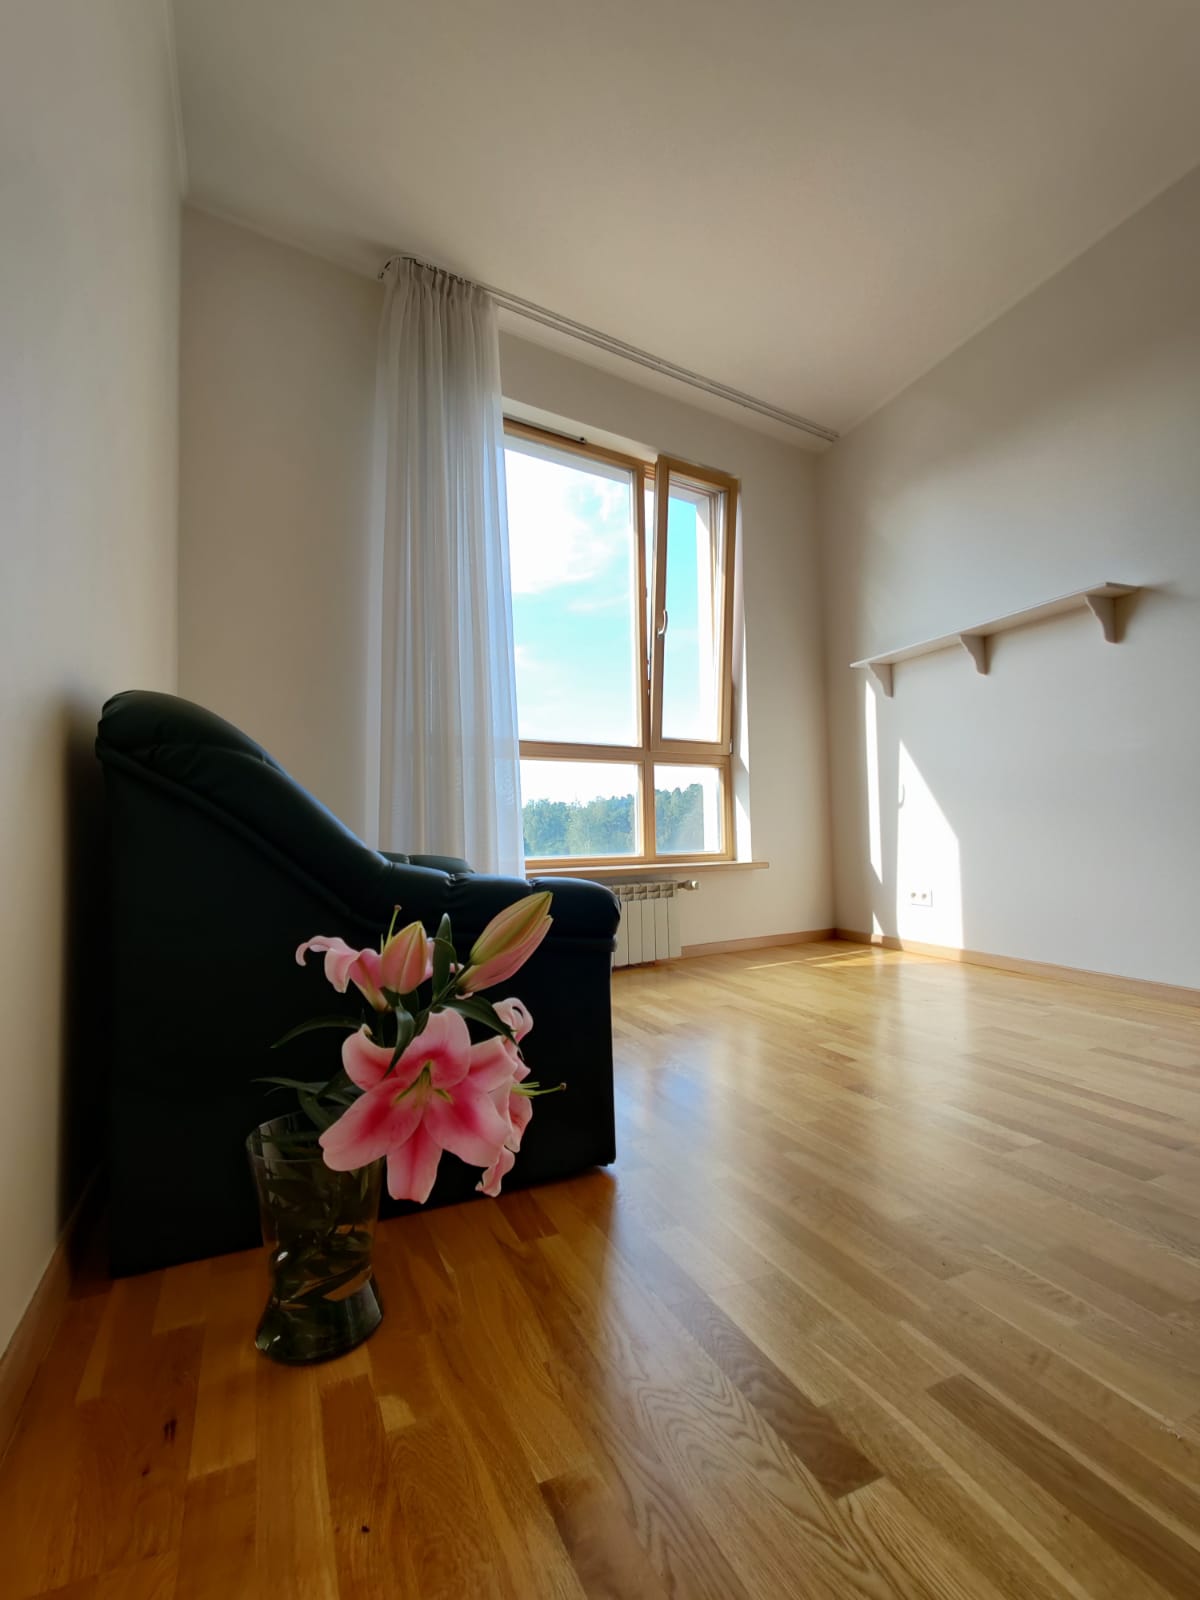 Apartment for rent, Liepu street 1 - Image 1